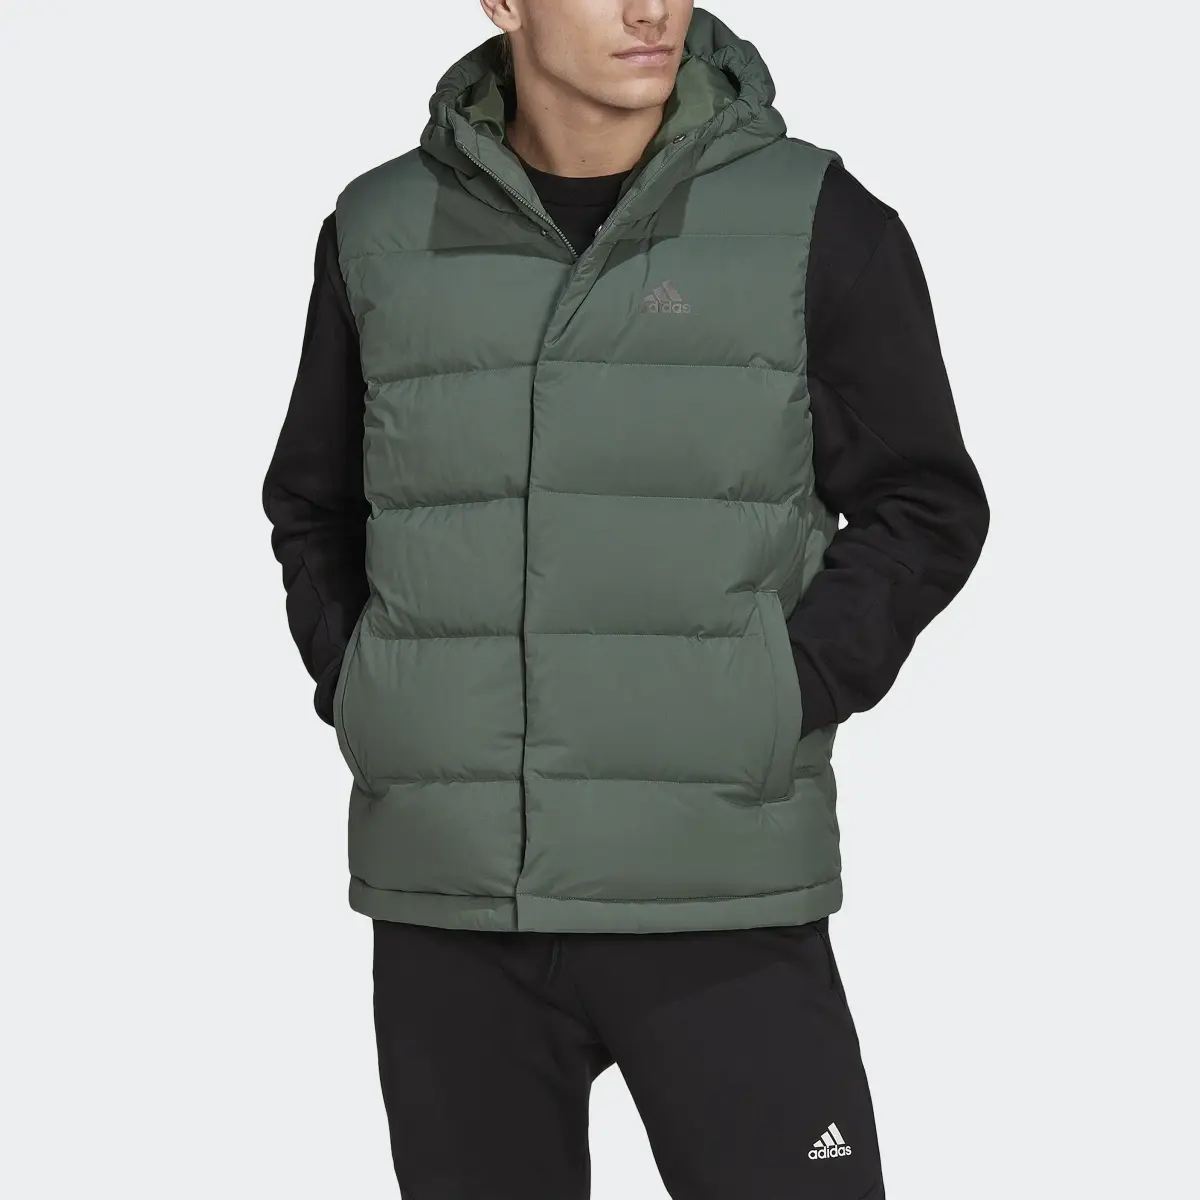 Adidas Helionic Hooded Down Vest. 1